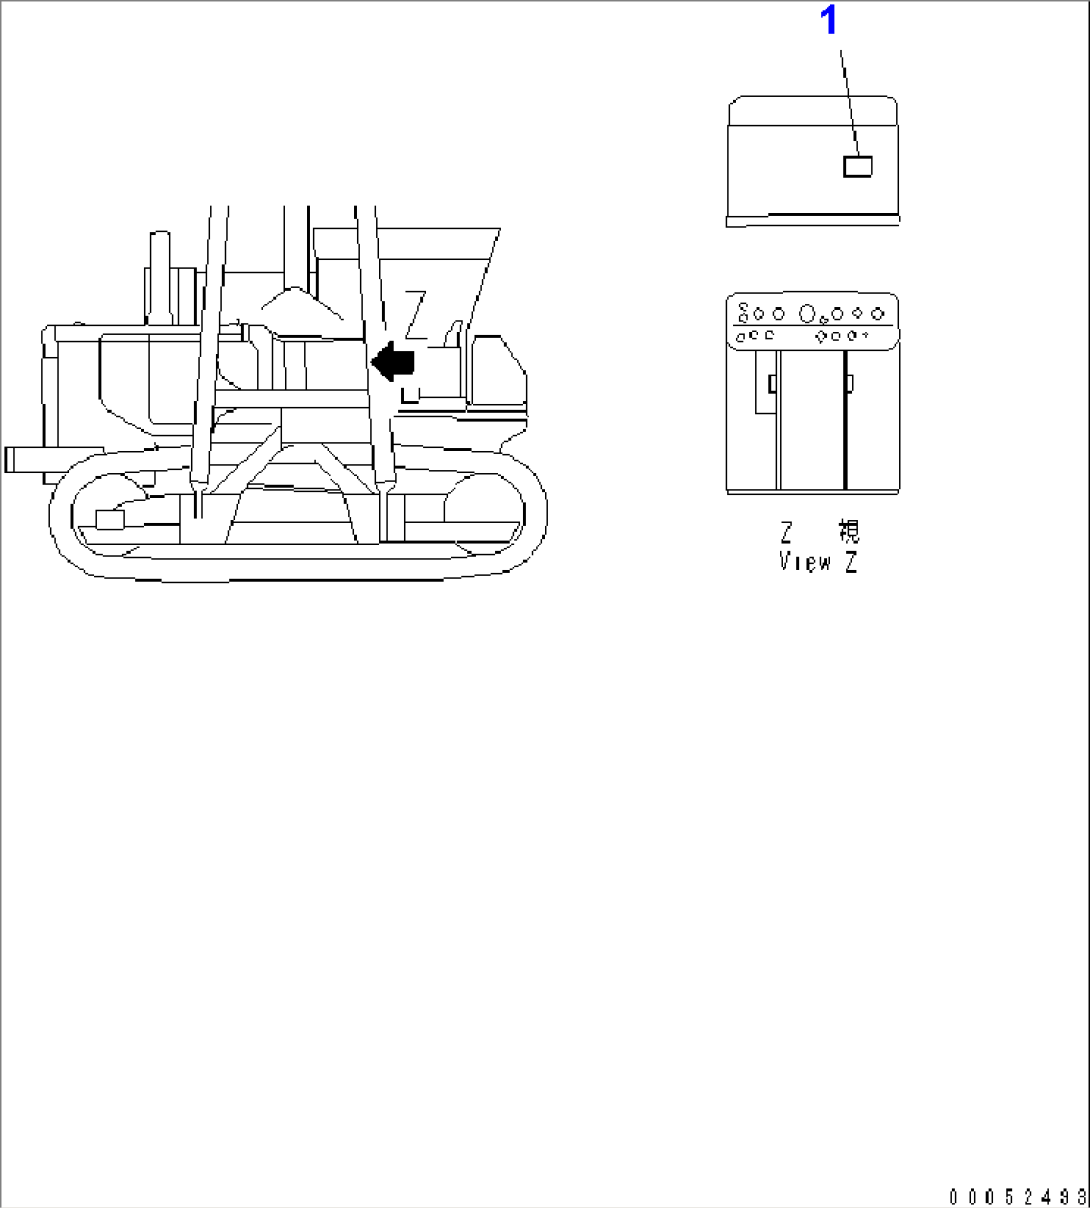 MARK AND PLATE (SEAT BELT)(#31654-)